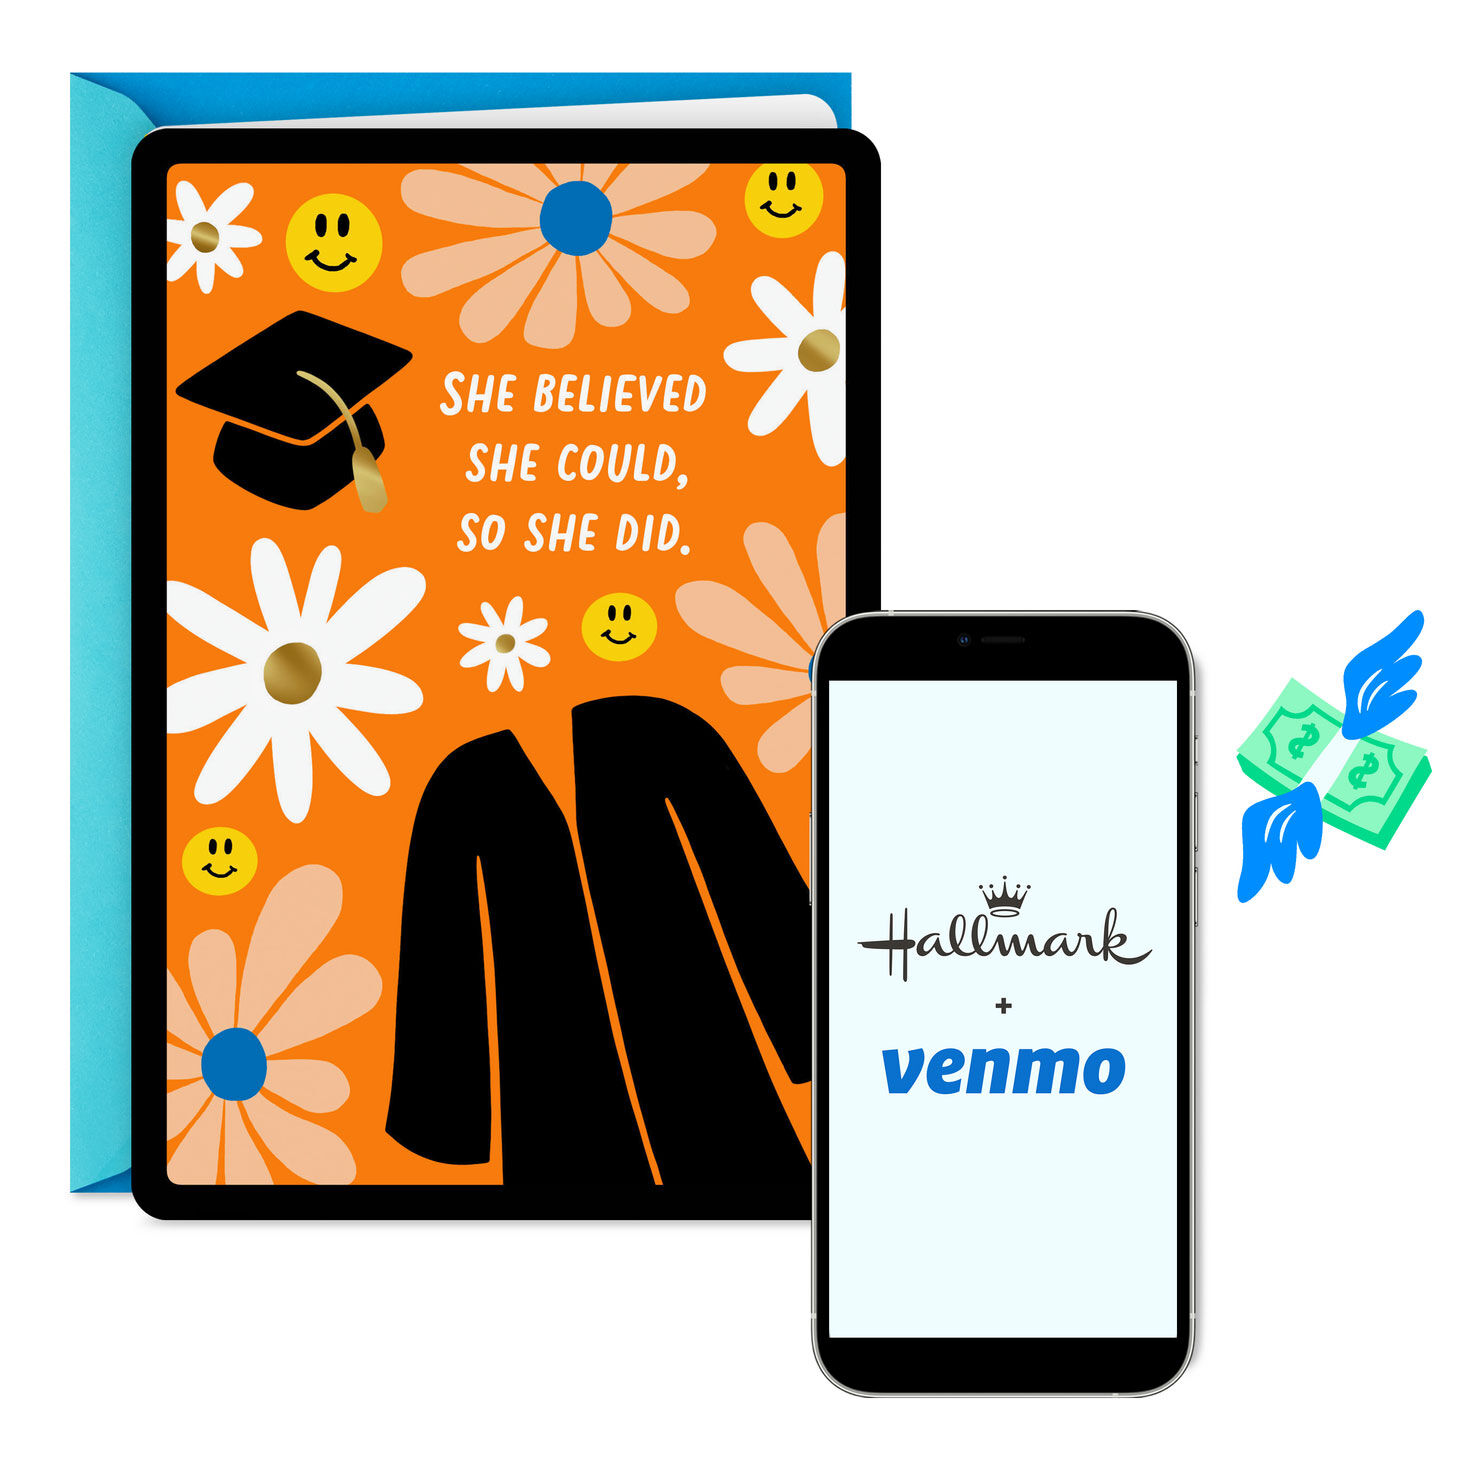 She Believed She Could So She Did Venmo Graduation Card for Her for only USD 4.99 | Hallmark